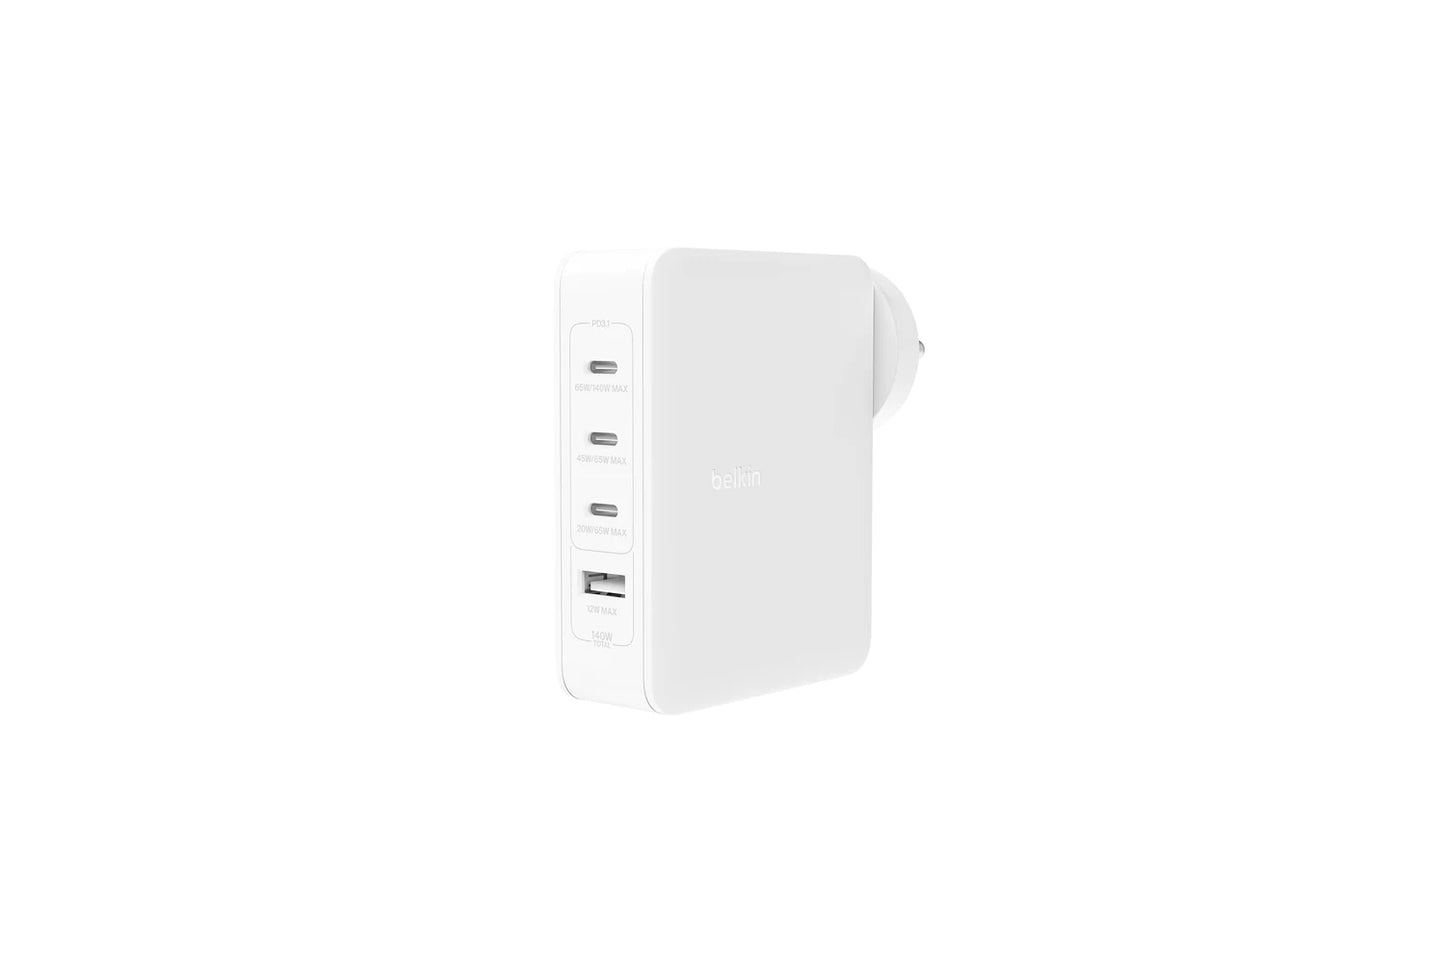 Belkin 140W GaN 4-Port (3X USB-C and 1x USB-A) PD 3.1 Fast Wall Charger, Compact Size, Compatible with MacBook Pro, MacBook Air, USB-C Laptops, iPhone 15 & Other USB-C Devices - White